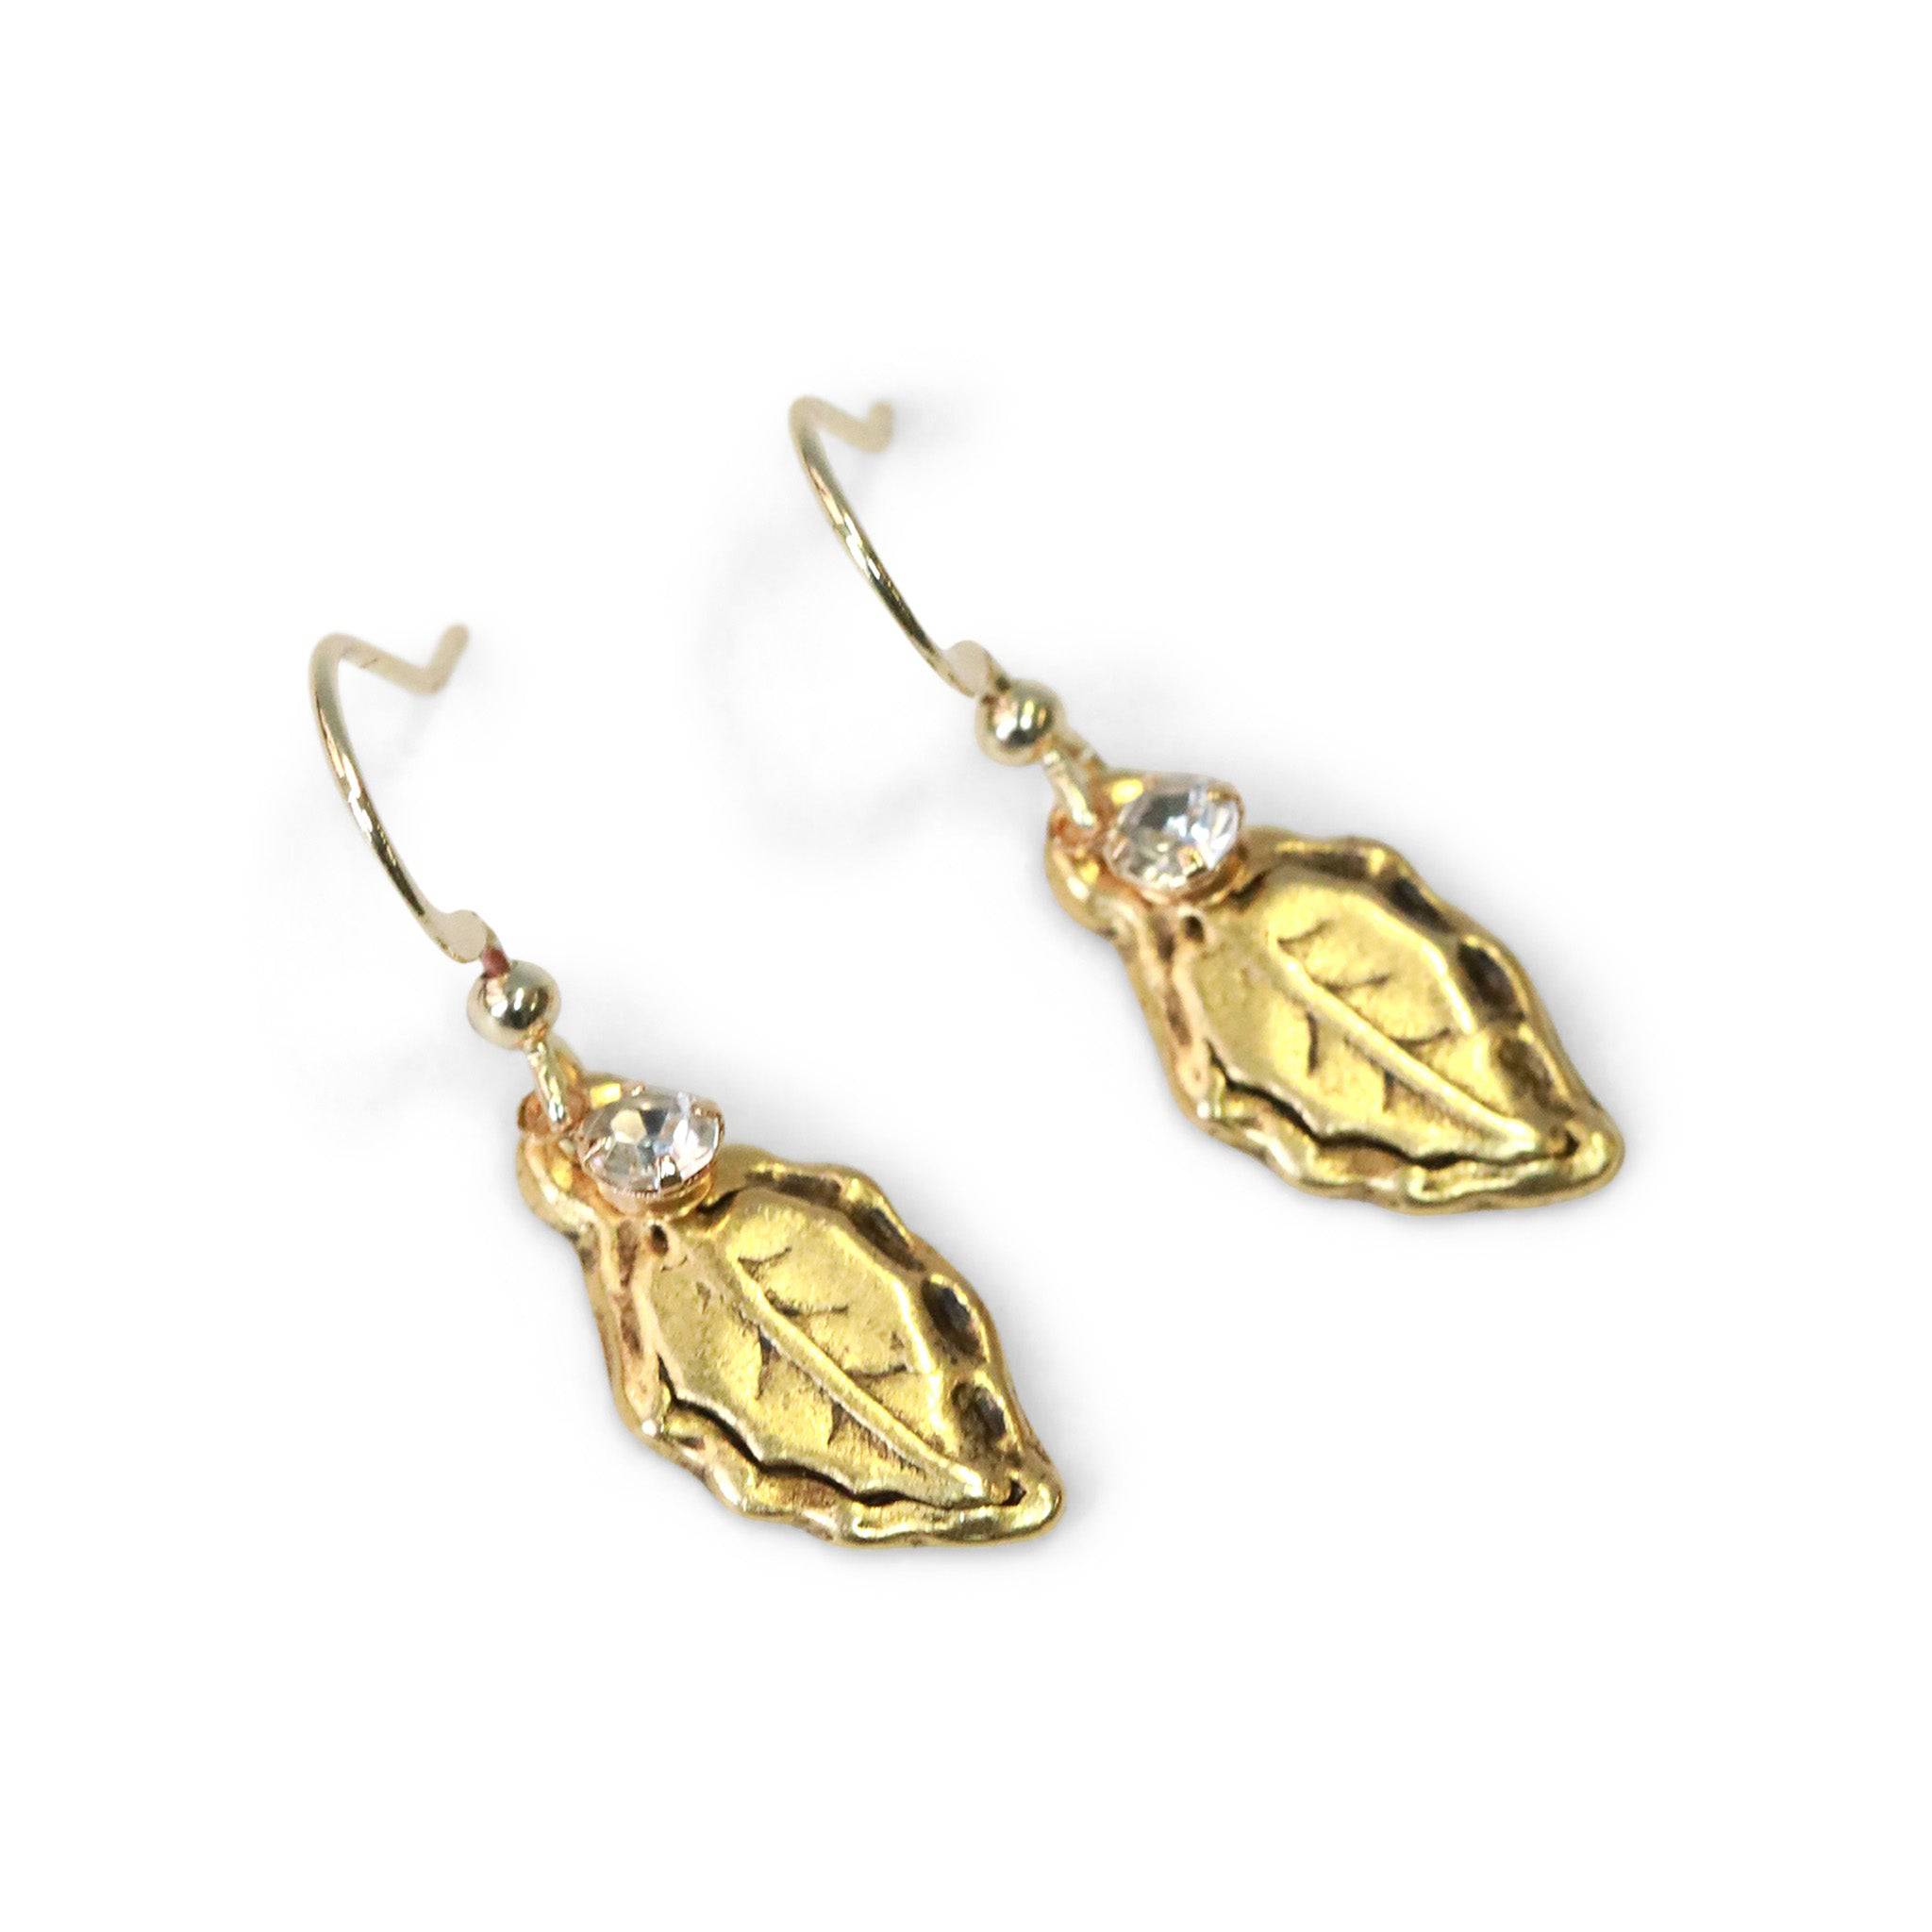 forest leaf charm earrings in gold with crystal charm matching earrings